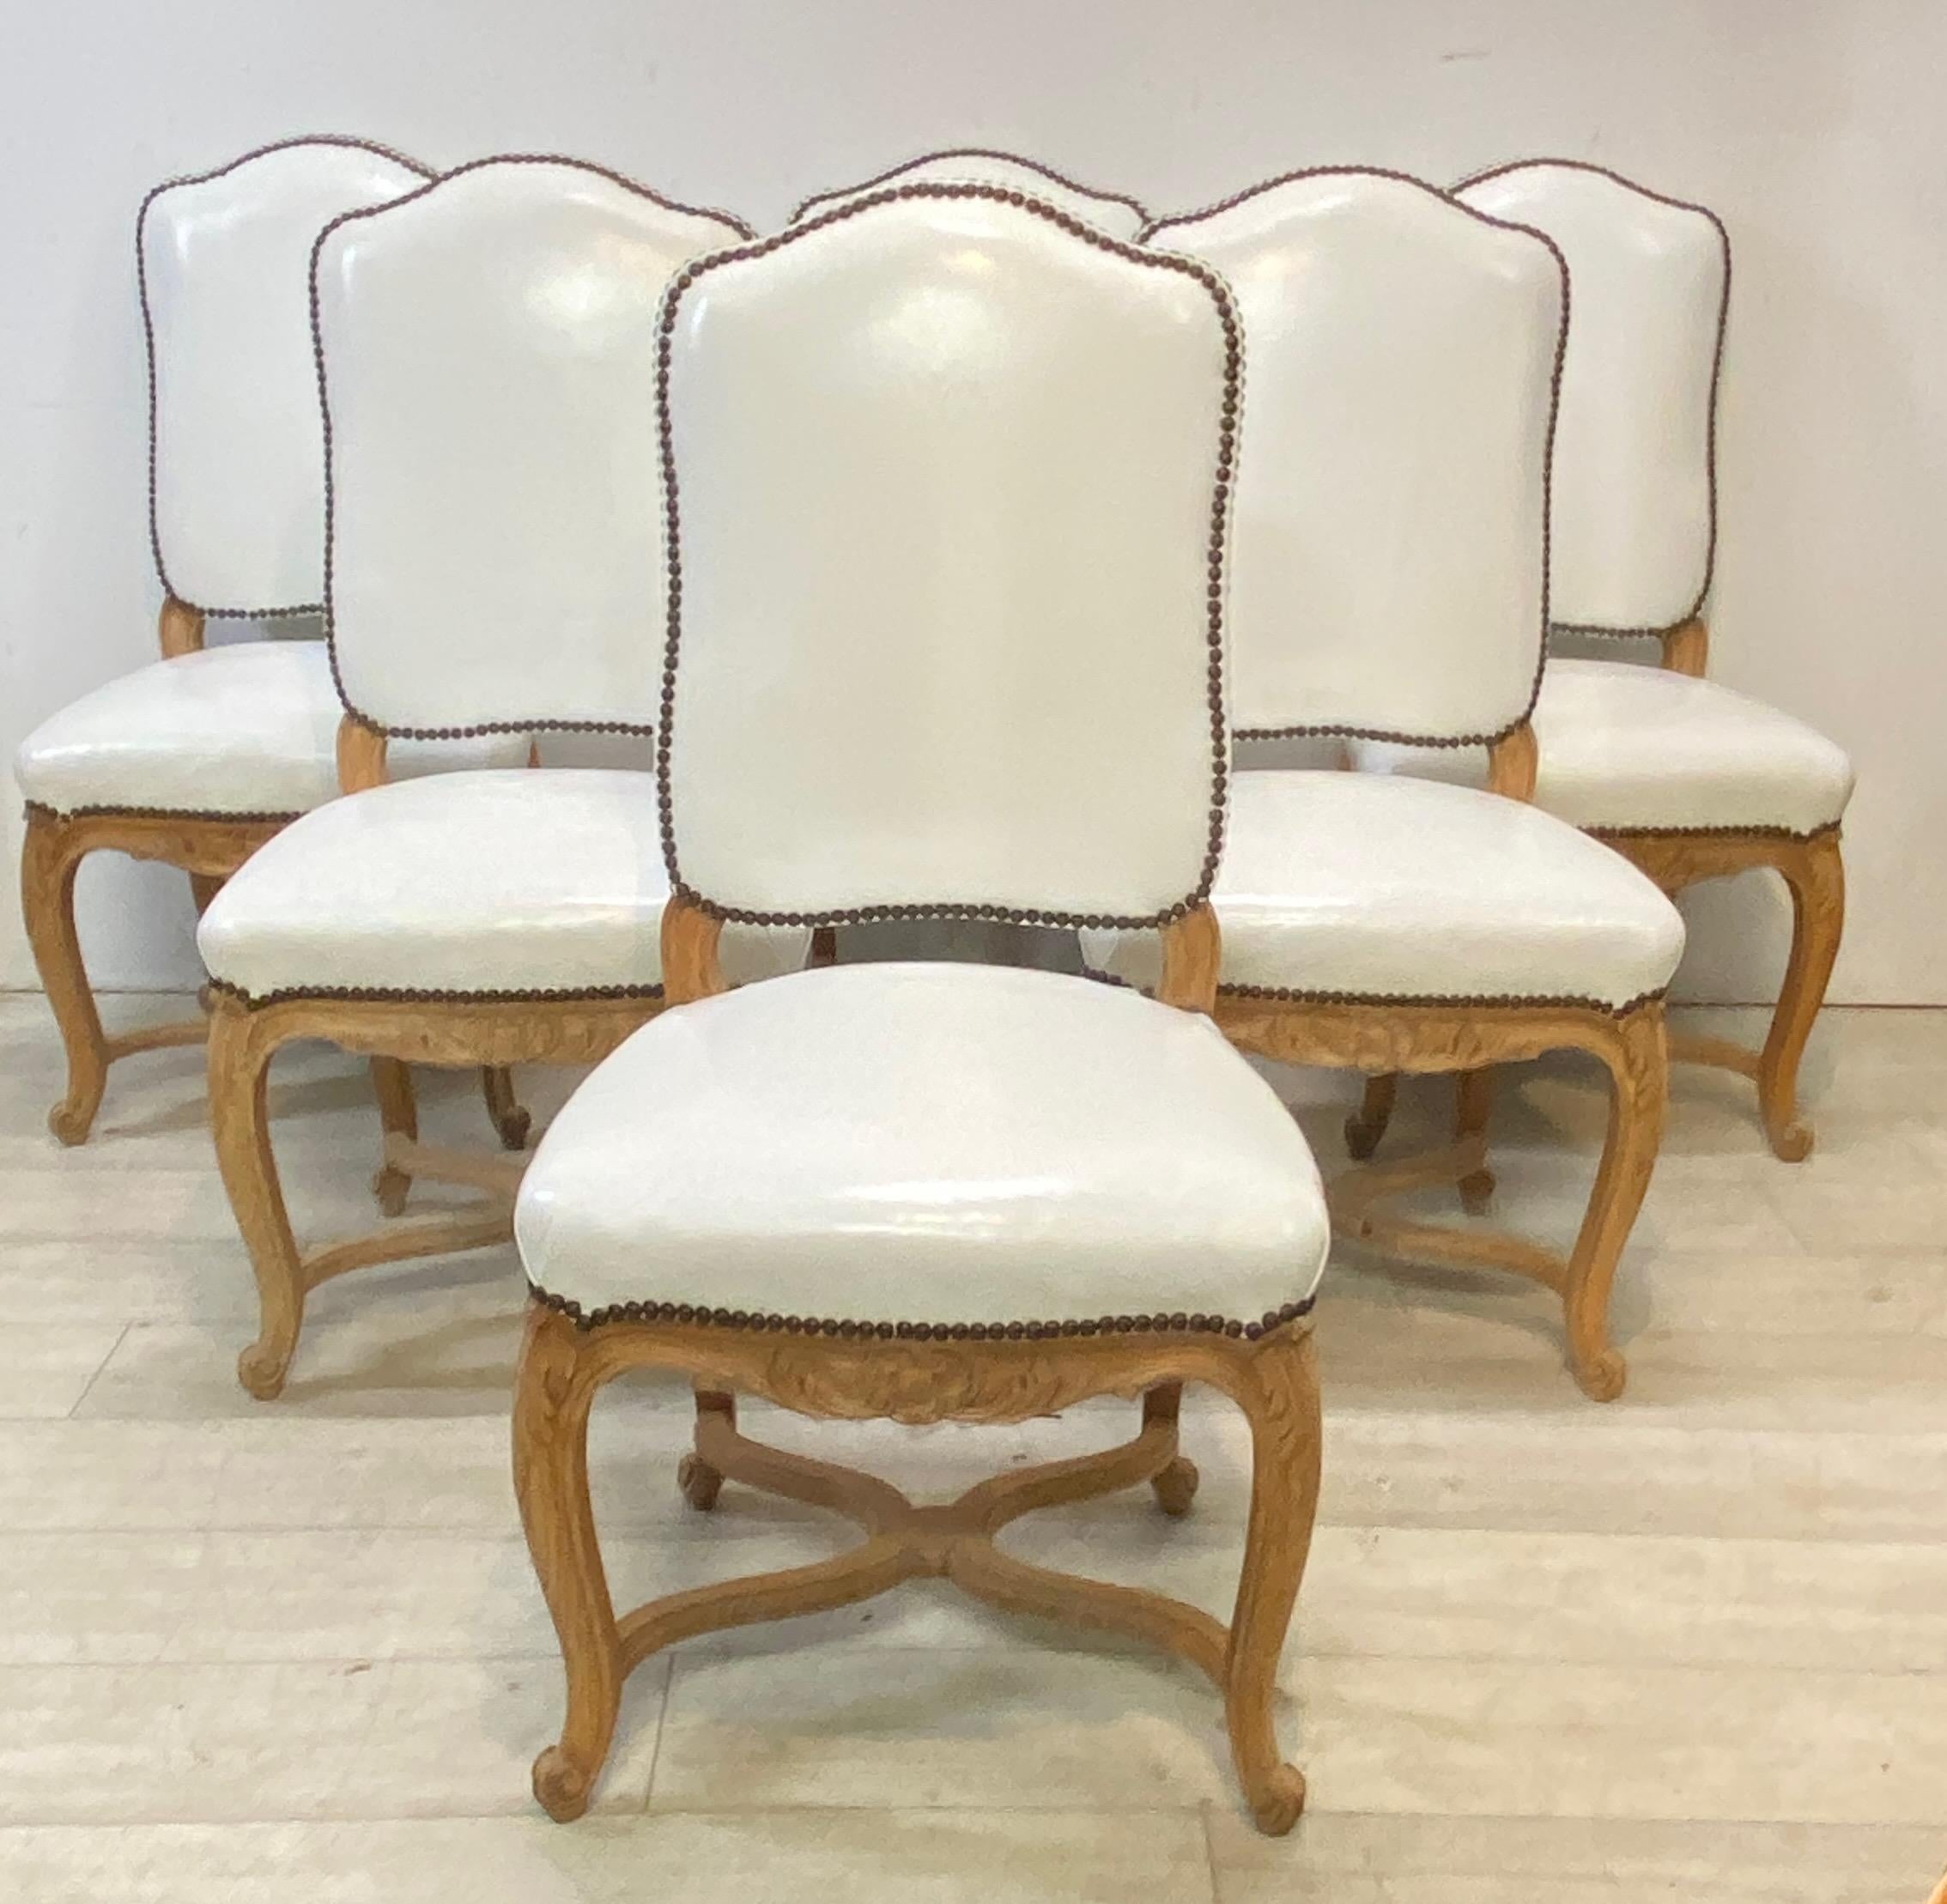 A set of six carved wood and white leather dining chairs. From the Calistoga California estate of the artist Ira Yaeger.
Chairs are sturdy and sound, with some minor indications of wear to the leather.
France, mid 20th century.
Ira Yeager is an